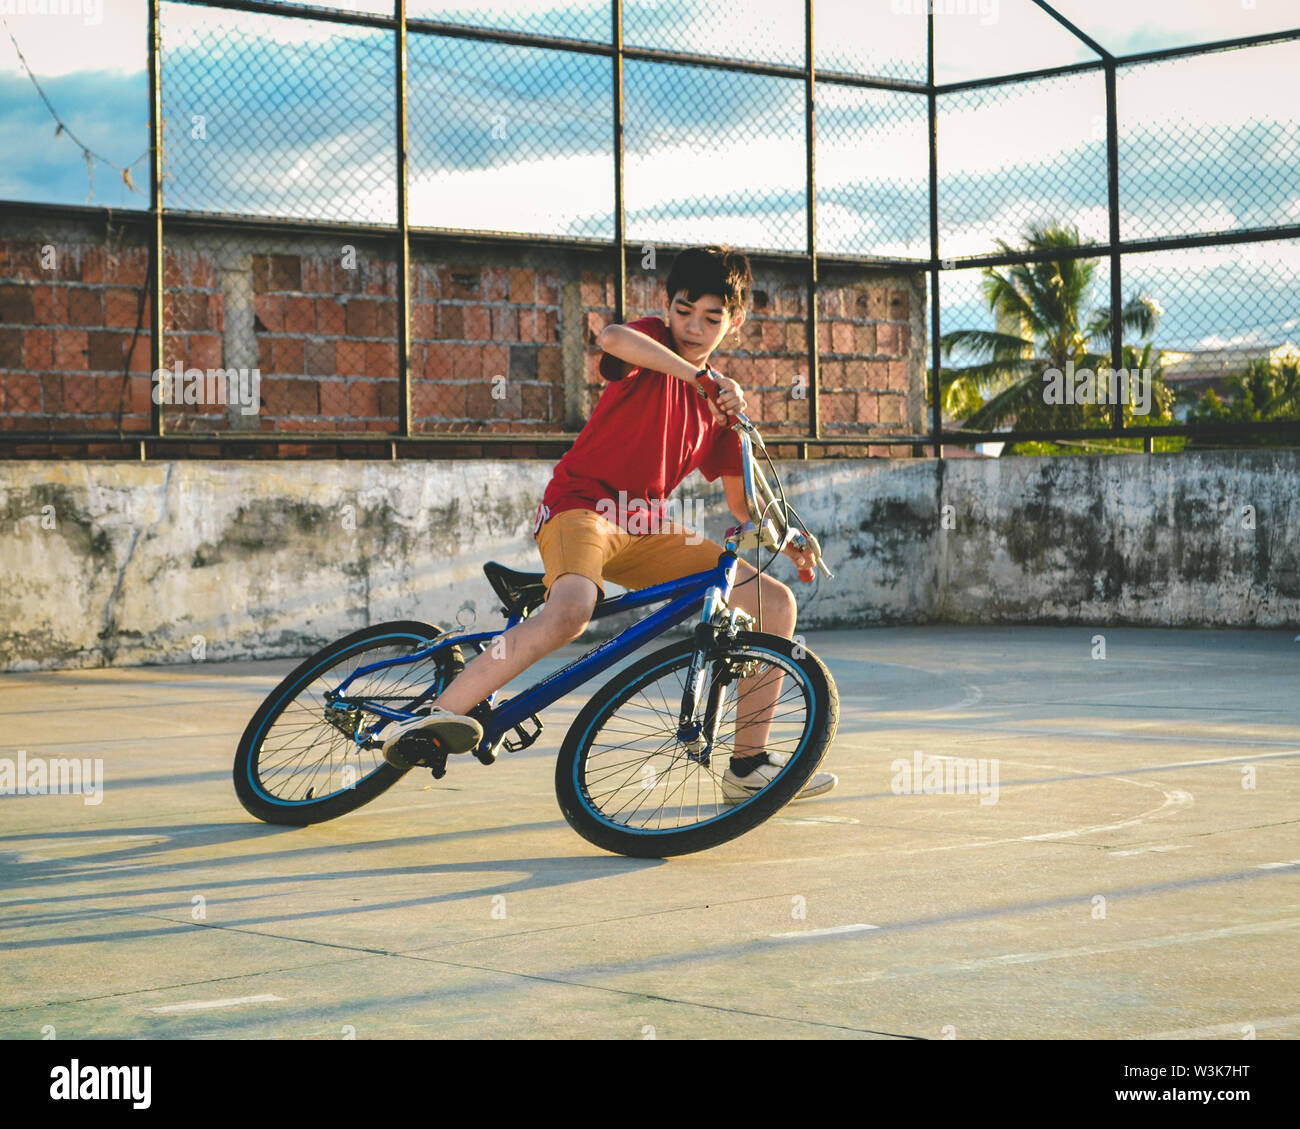 A 12 years old kid doing some tricks on his new bicycle! Stock Photo